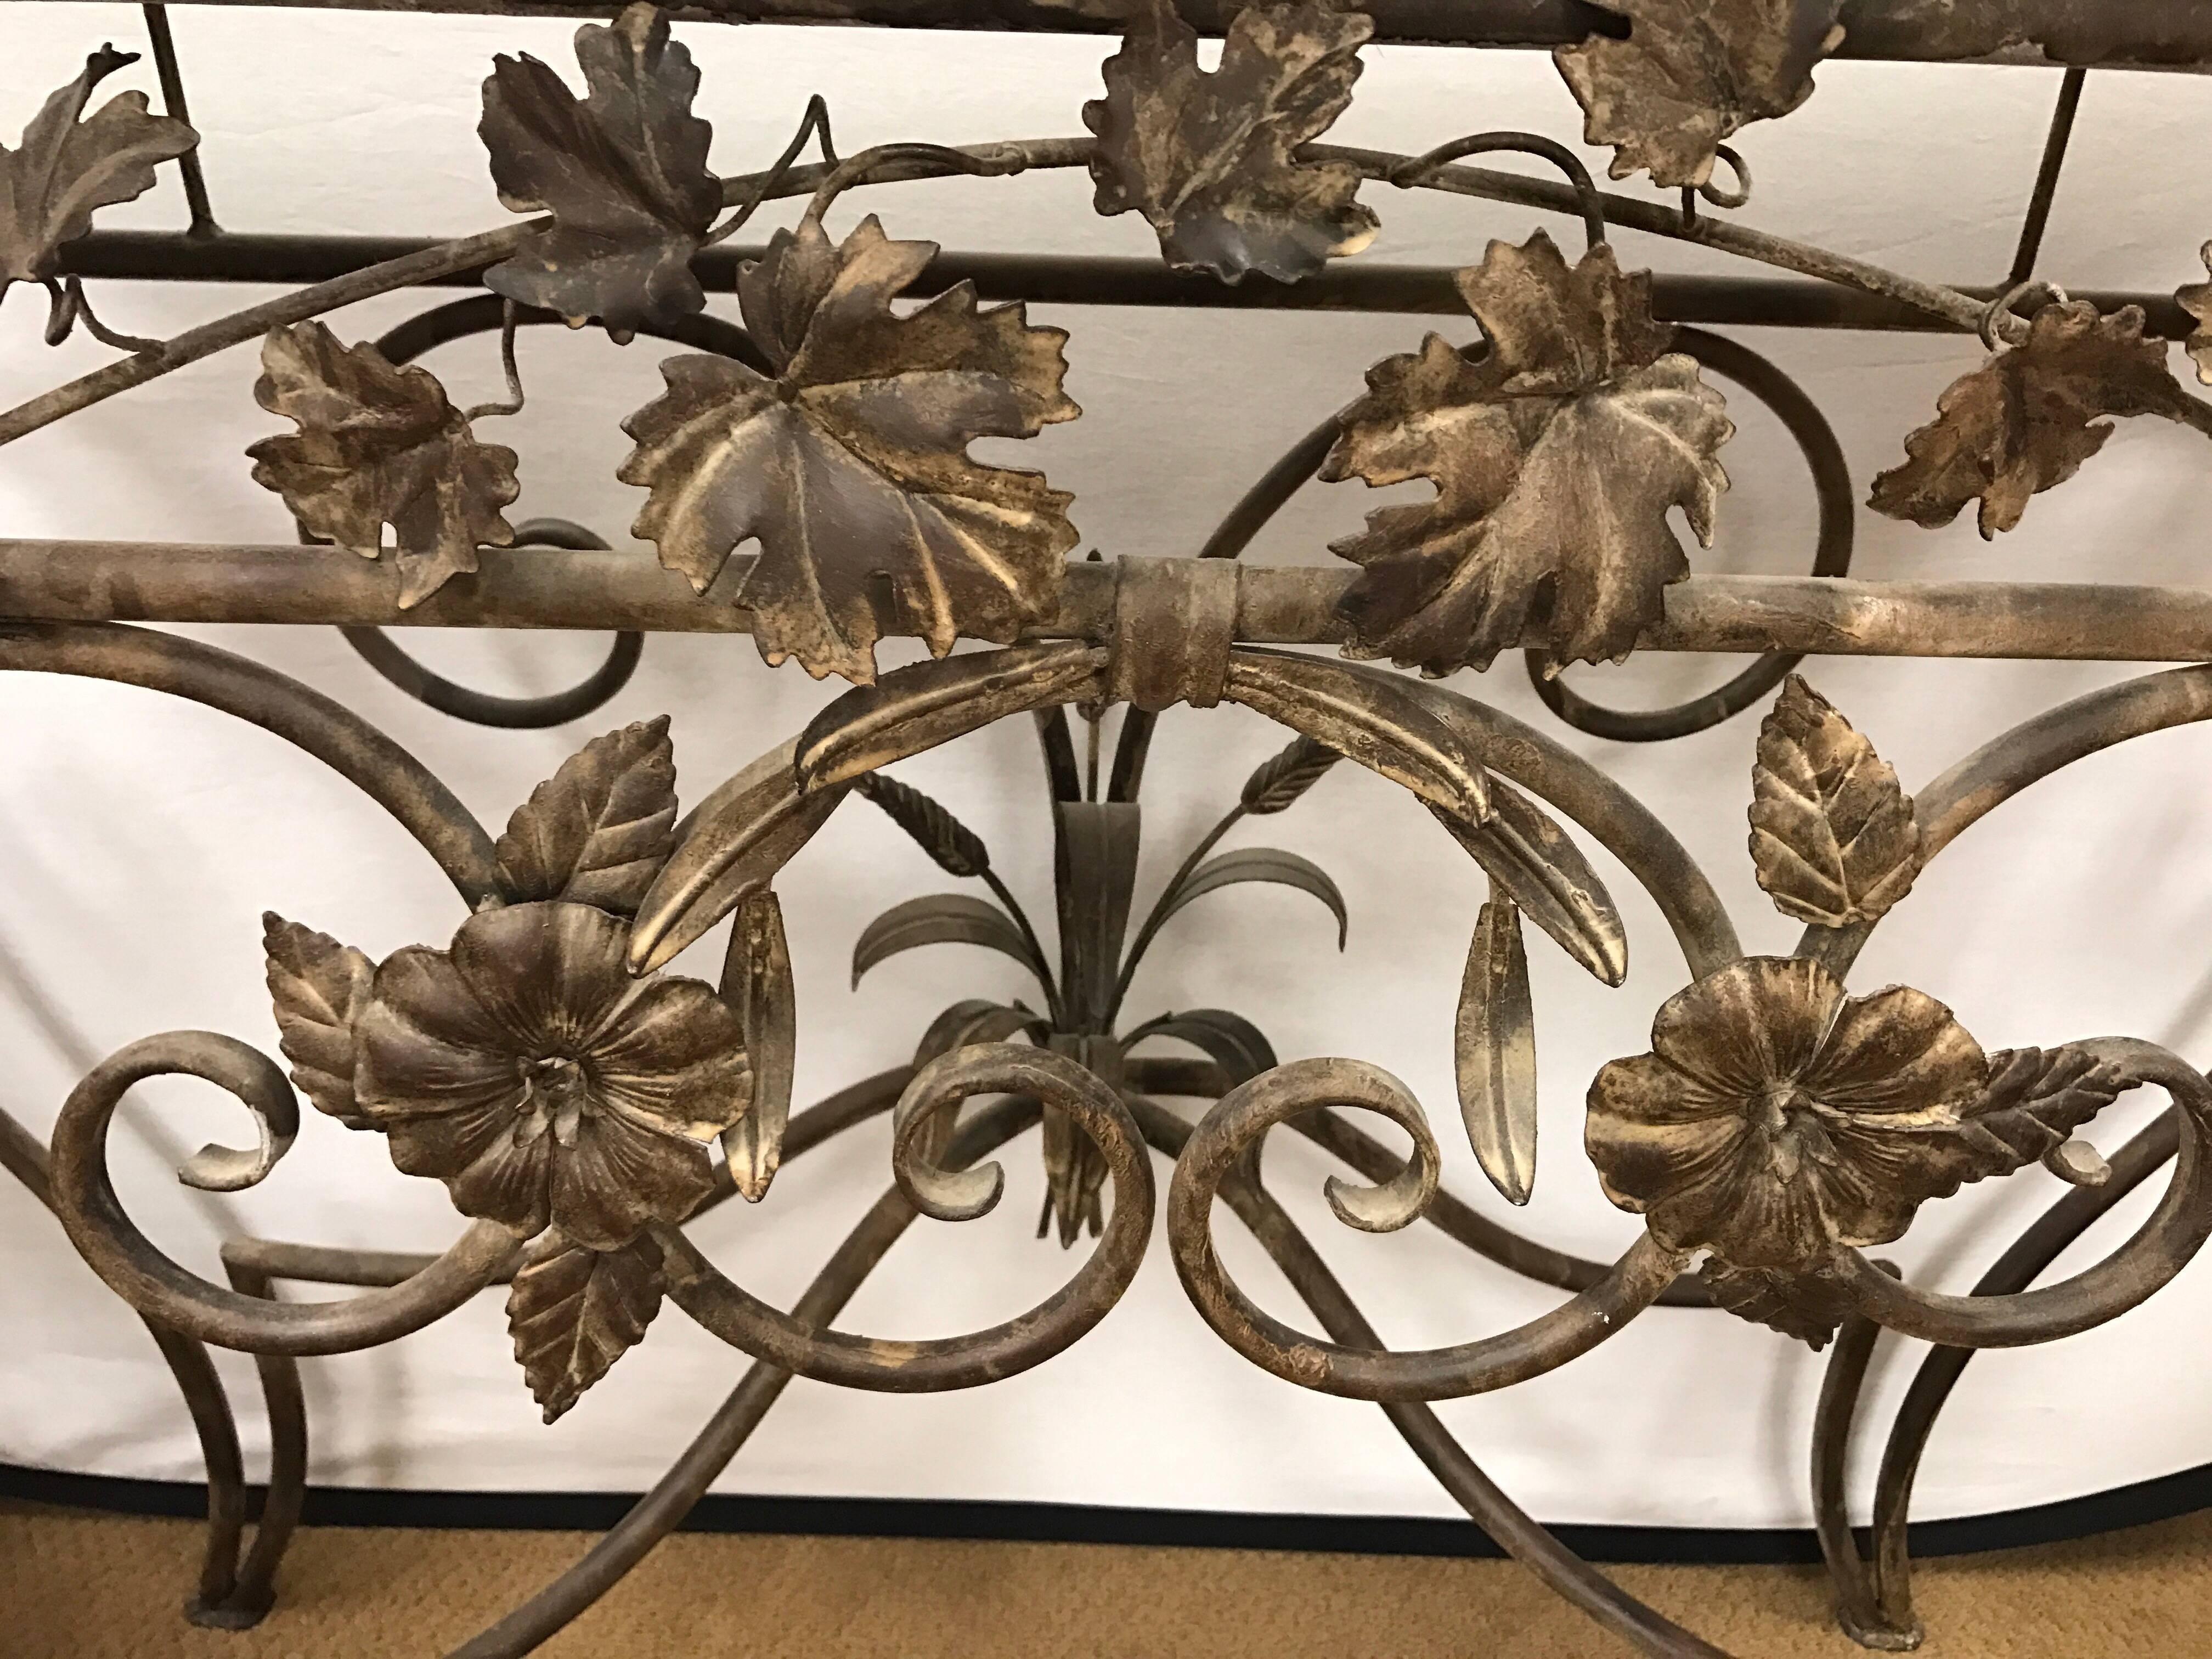 Custom made gold iron console table has a cream marble top with scrolled metal work of flowers and wheat sheaves. The metal work is unusual and quite elaborate.